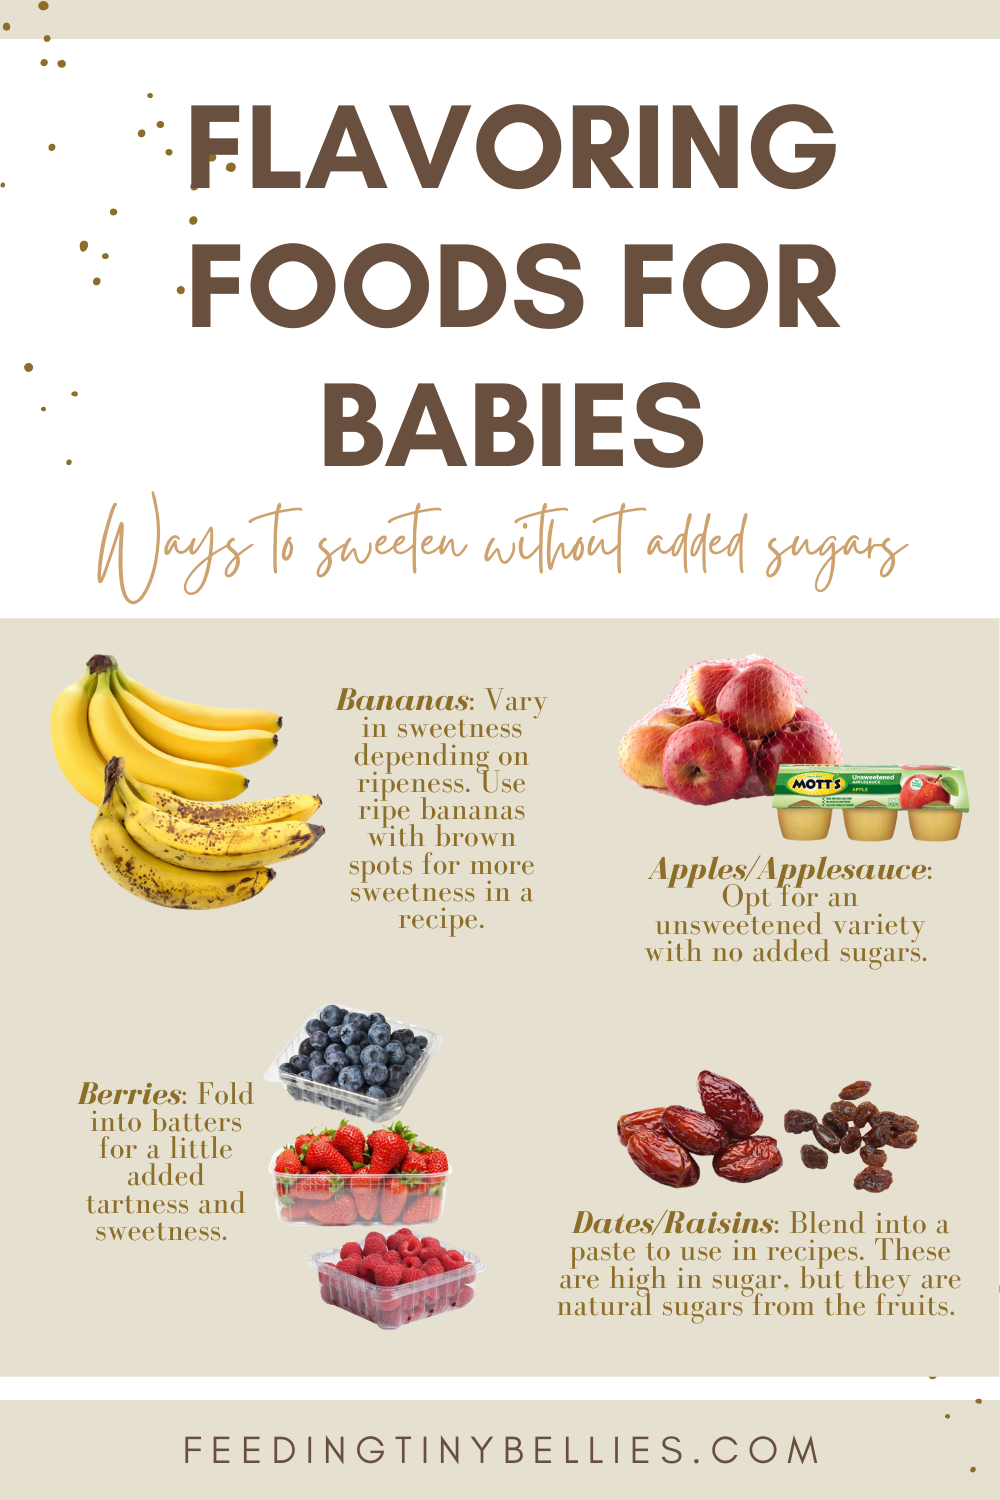 Flavoring foods for babies - Ways to sweeten without added sugars